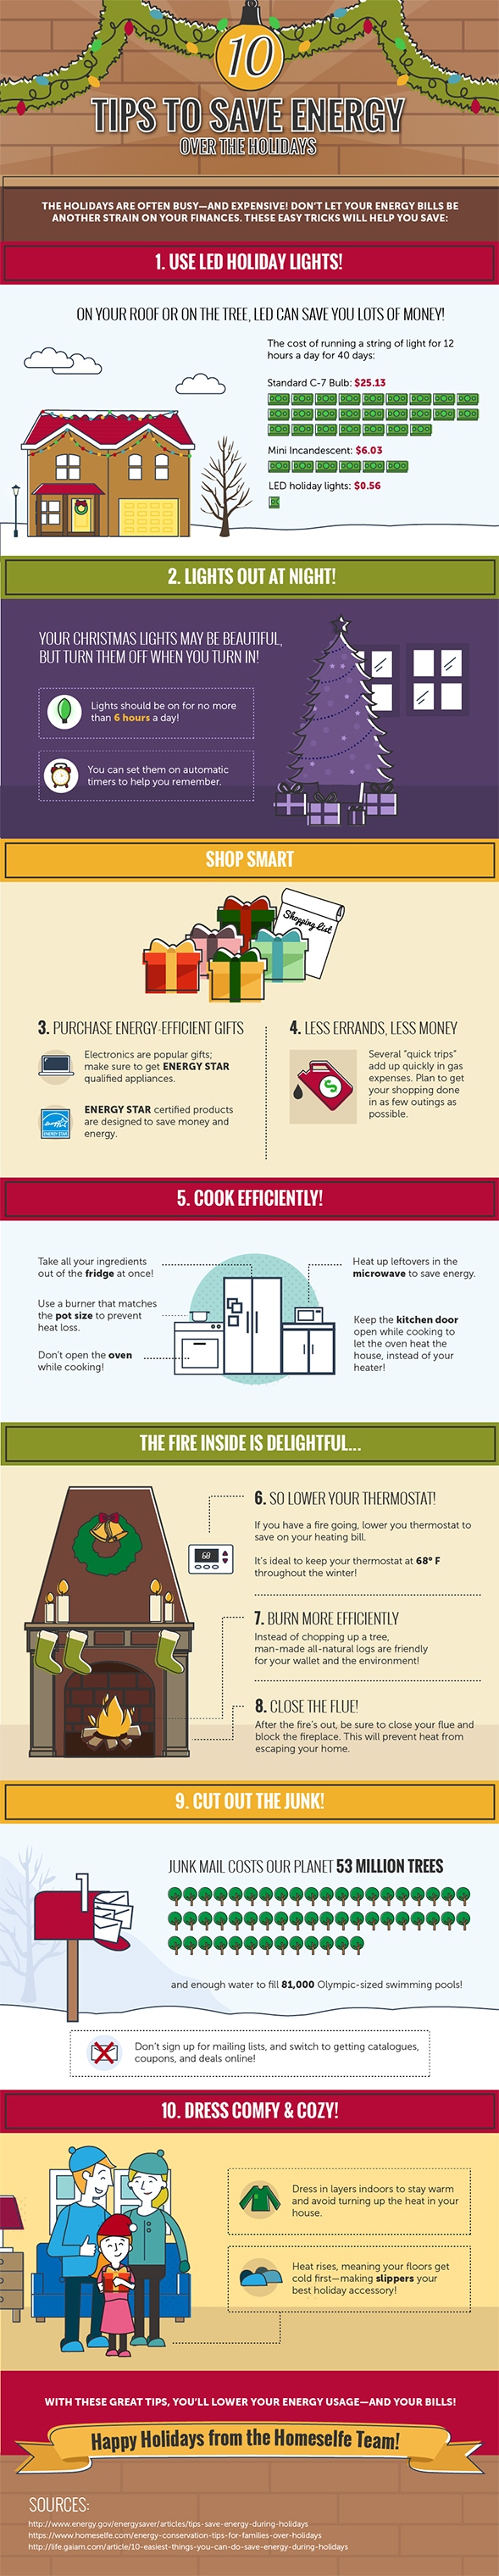 Tips_to_Save_Energy_Infographic